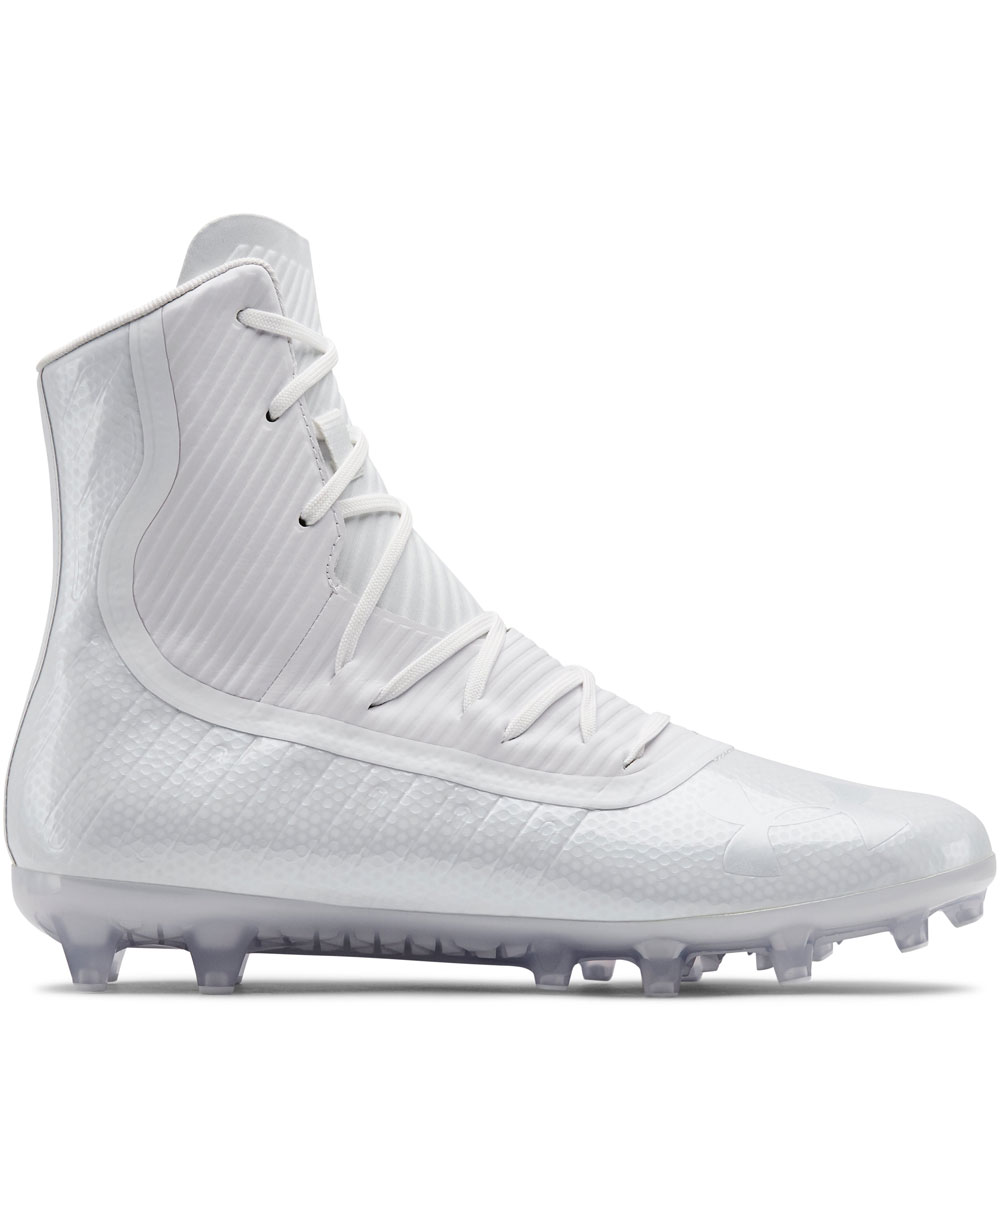 under armour white highlight cleats